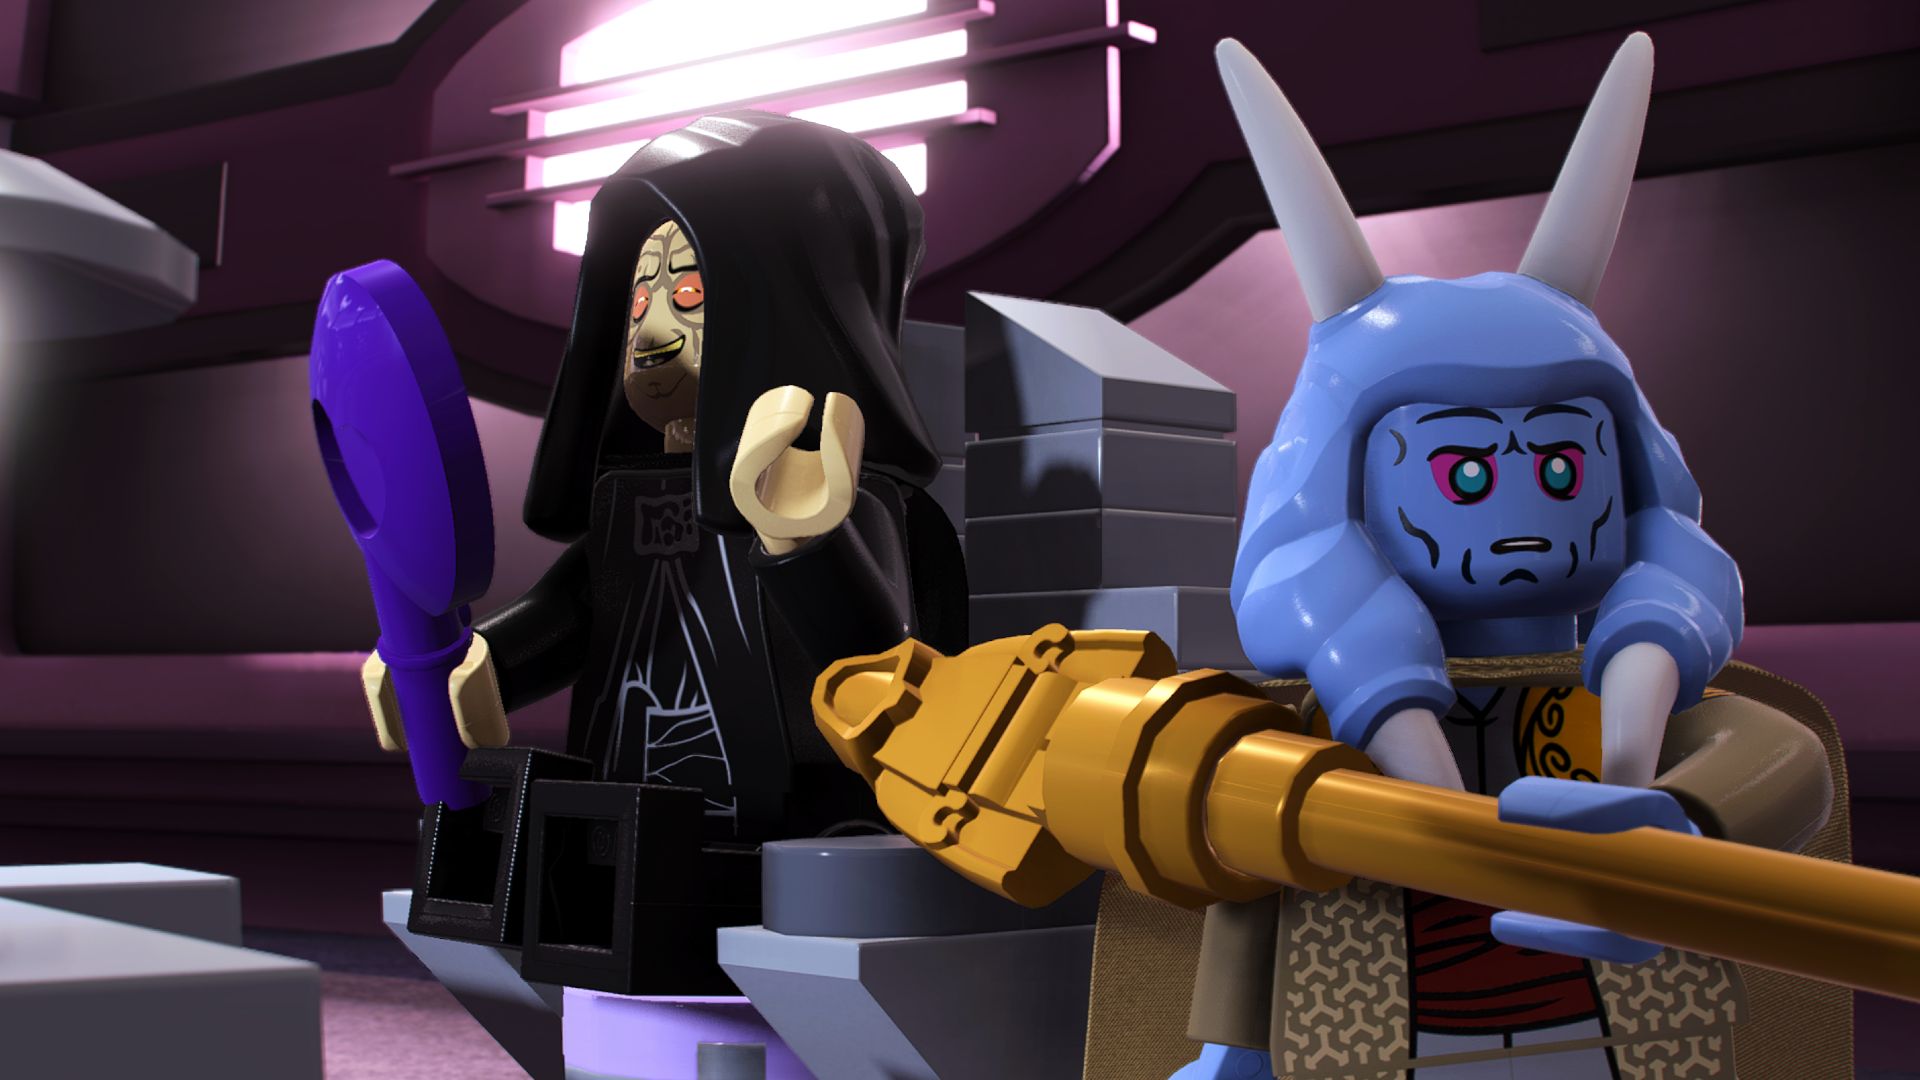 LEGO Star Wars Skywalker Saga hands-on gameplay review - 9to5Toys